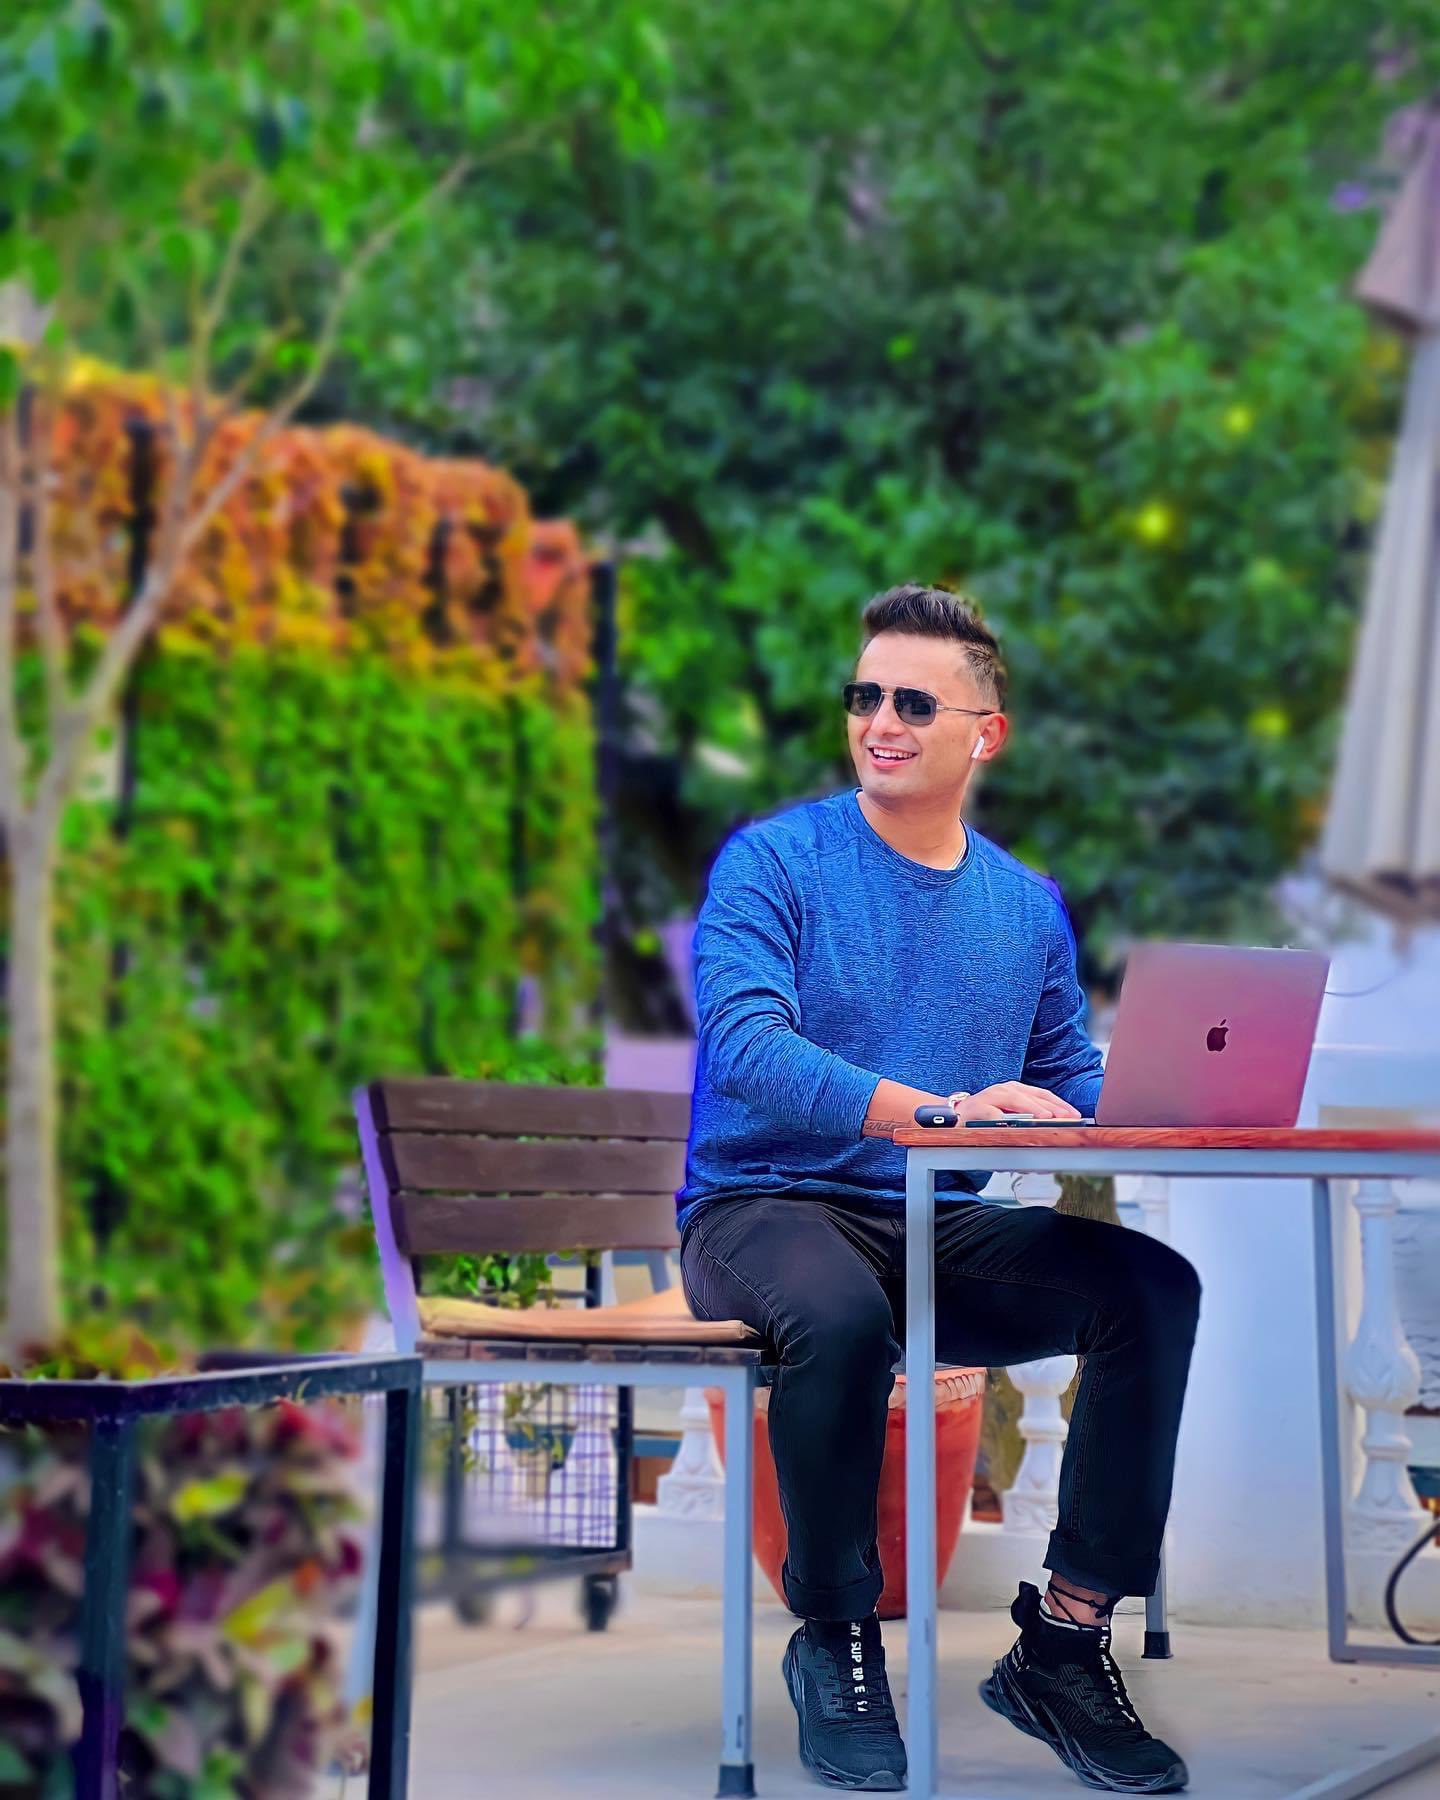 Dr Sandesh Lamsal (in Nepali: डा. सन्देश लम्साल), born on 17th August 1994, in the Dang district of Nepal, is a Nepalese internet celebrity, doctor, sportsman, social media influencer, model and social worker known for his innovative posts on different social media platforms and achievements on his social, professional & public life. Accordingto different sources, Dr Sandesh Lamsal is the First Nepalese Internet Celebrity to be verified on all social media platforms including Google, Yahoo, Bing, Amazon, YouTube, Telegram, TikTok, Likee, Moj, Josh, Chingari, Tiki, Huut and Vero app in 2022. He is also considered the Most Stunning Nepali Man by different news sources, on the basis of his astonishing social media posts, bold character and hot photographs found on the internet.